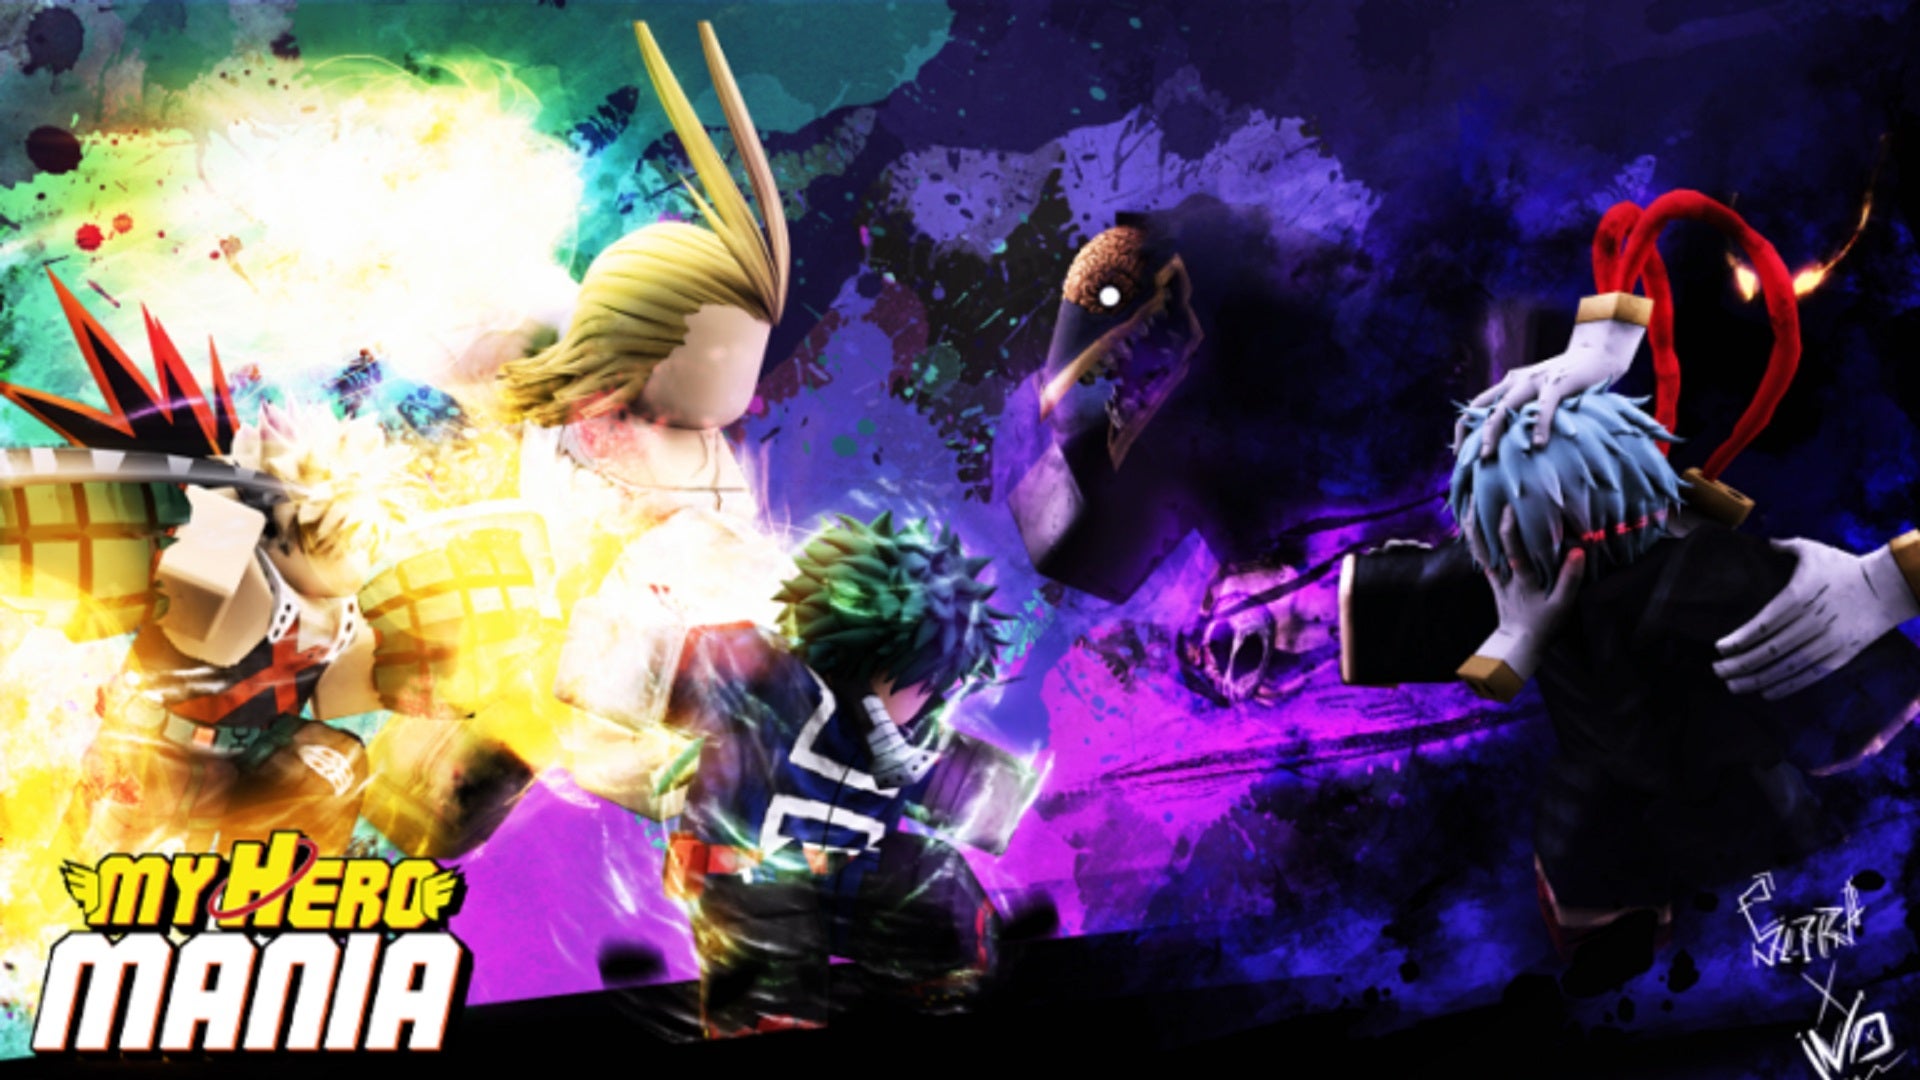 Several elementally-empowered characters face off against each other in a Roblox banner for My Hero Mania.